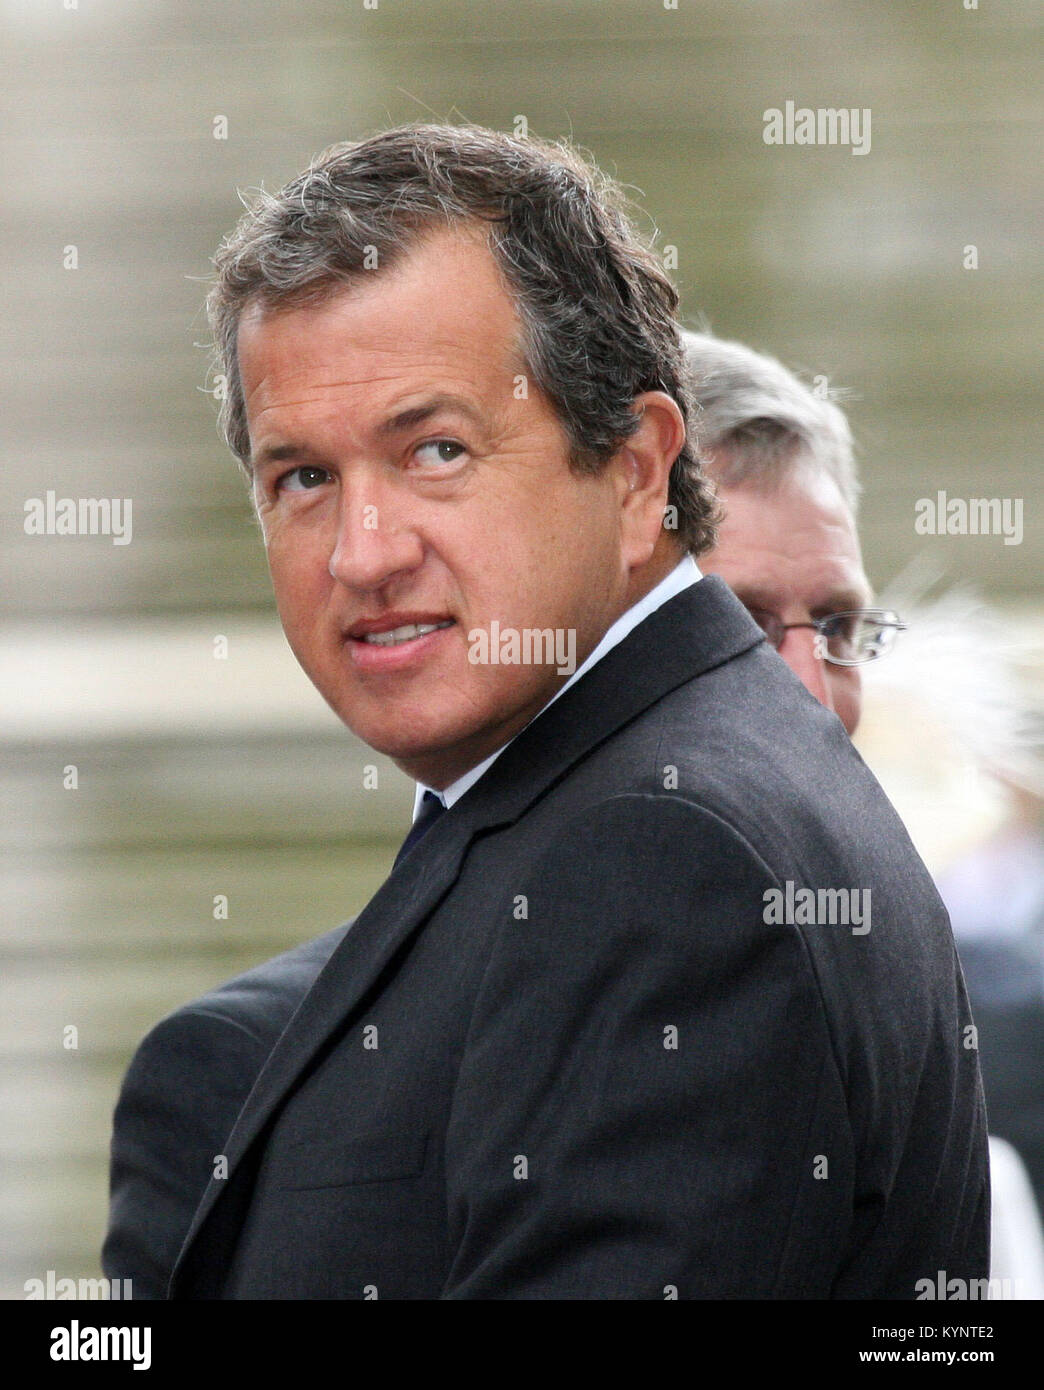 London, UK. 31st Aug, 2007. Celebrity photographer Mario Testino arrives for the Service of Thanksgiving for the life of Diana, Princess of Wales, at the Guards' Chapel in London, England, 31 August 2007. Prince William and Prince Harry organised the Thanksgiving Service to commemorate the life of their mother on the tenth anniversary of her death. Credit: Albert Nieboer (ATTENTION: ) | usage worldwide/dpa/Alamy Live News Stock Photo